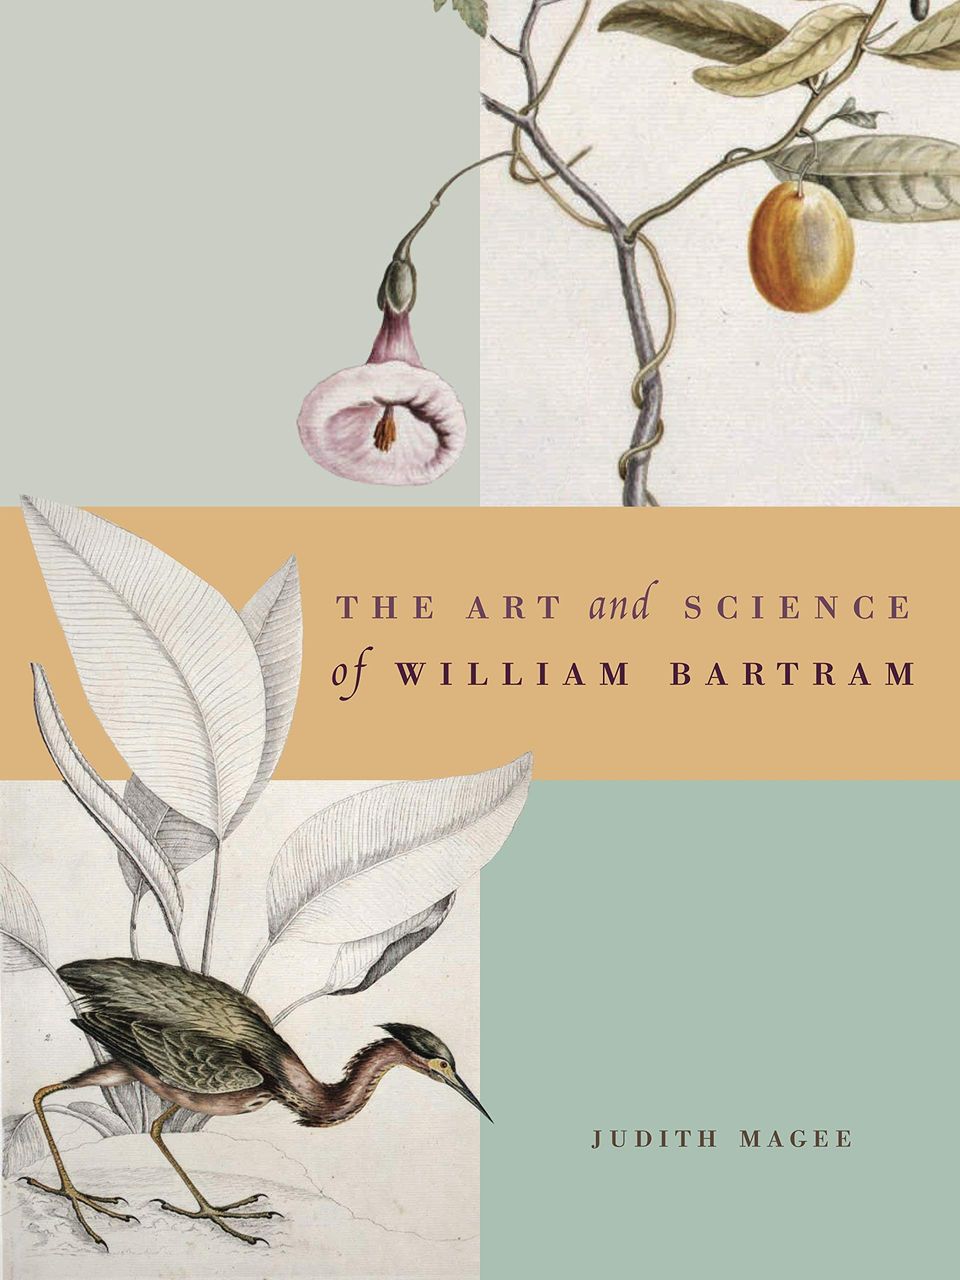 The Art and Science of William Bartram by Judith Magee